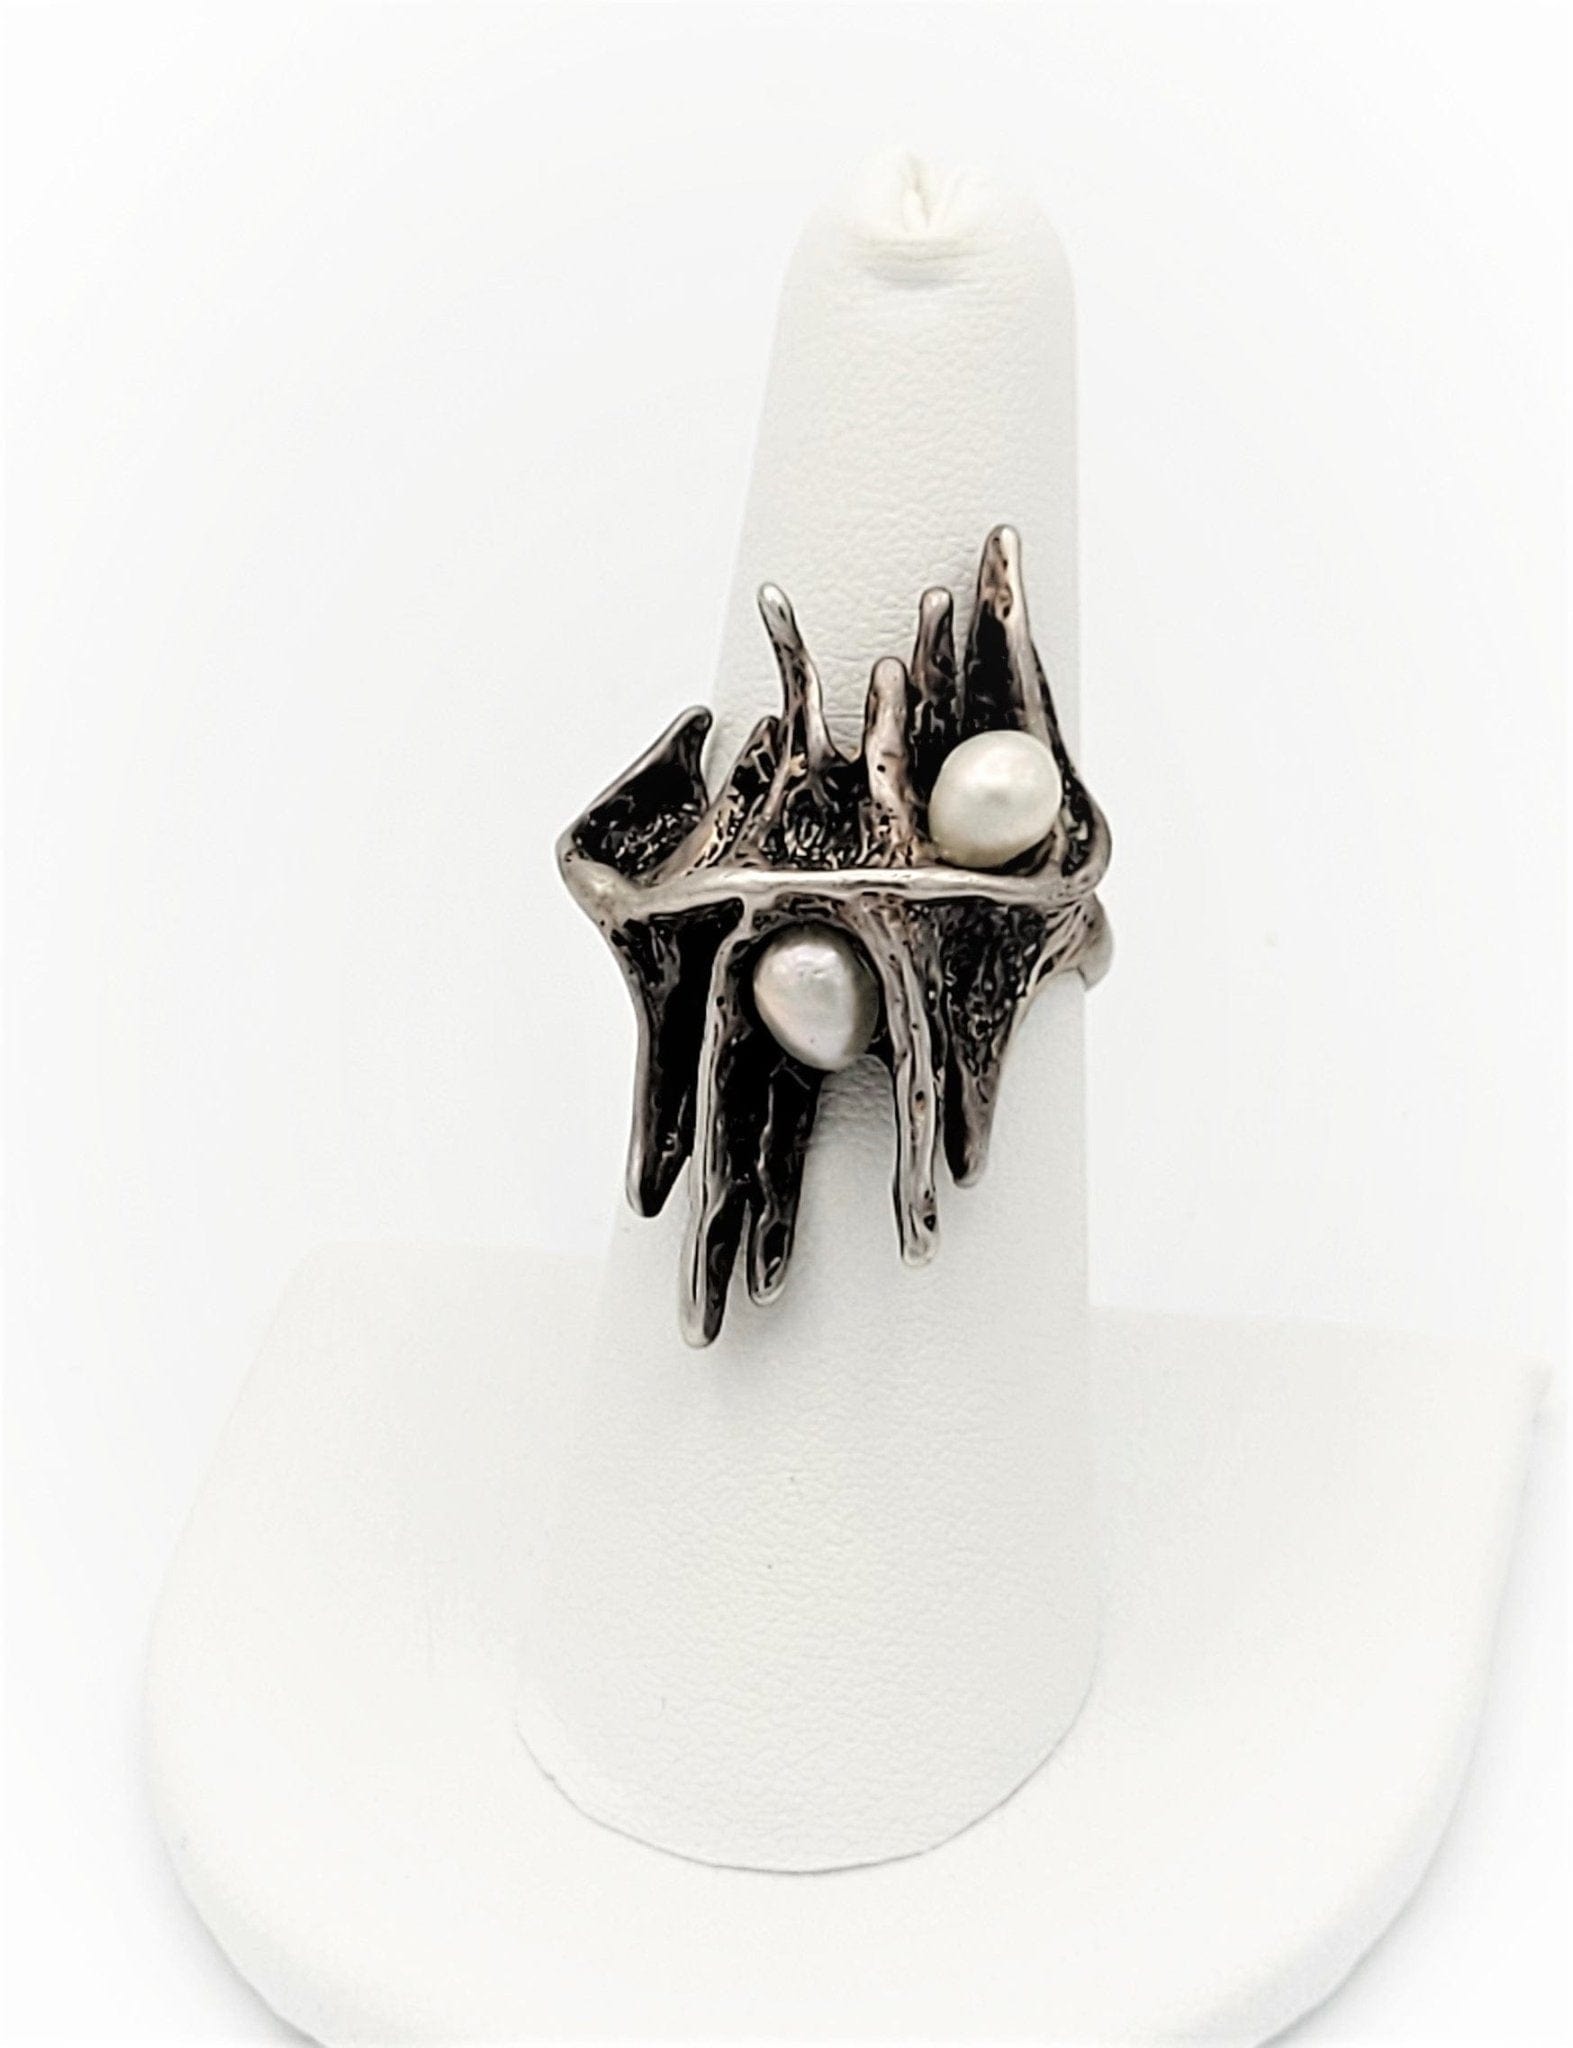 Brutalist Sterling Ring Jewelry Vintage Sterling Silver Modernist Abstract Brutalist Style Ring with 2 Accent Pearls